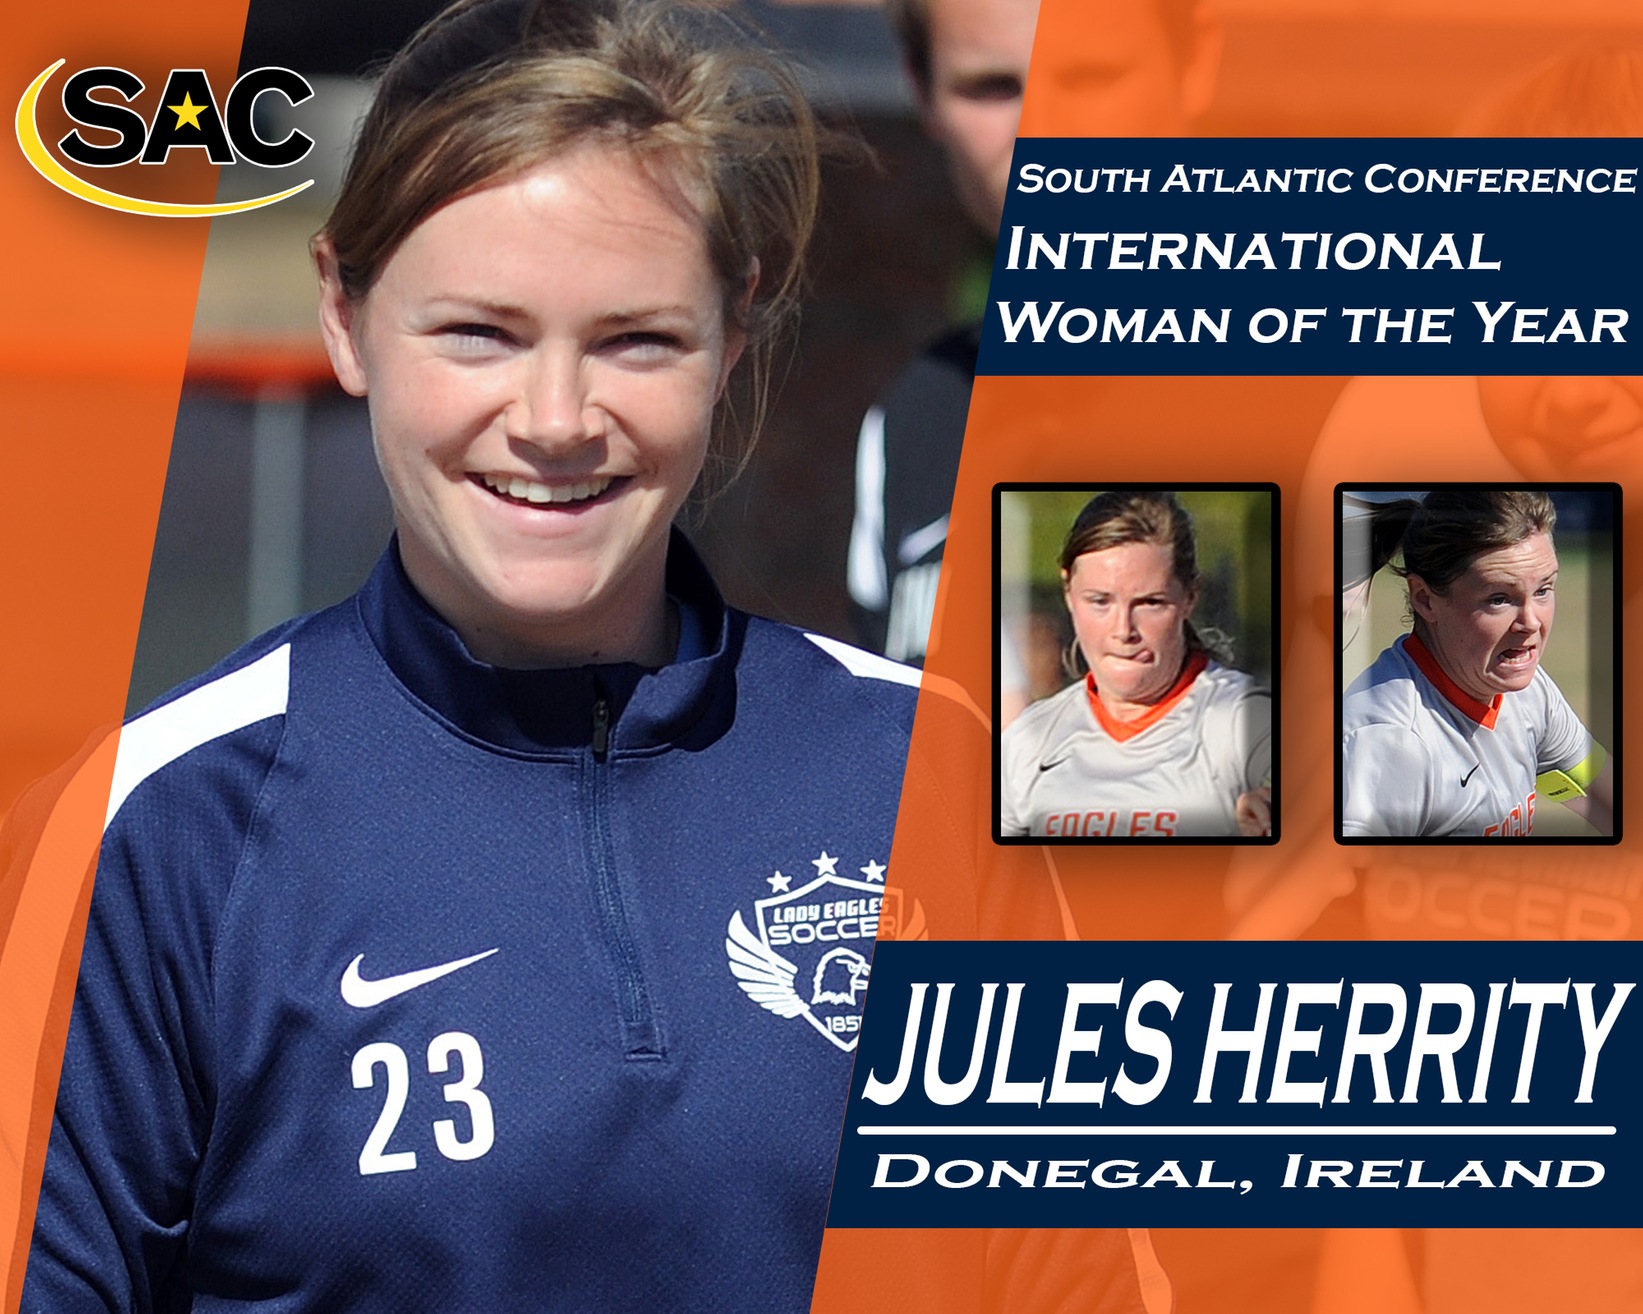 Herrity named International South Atlantic Conference Woman of the Year